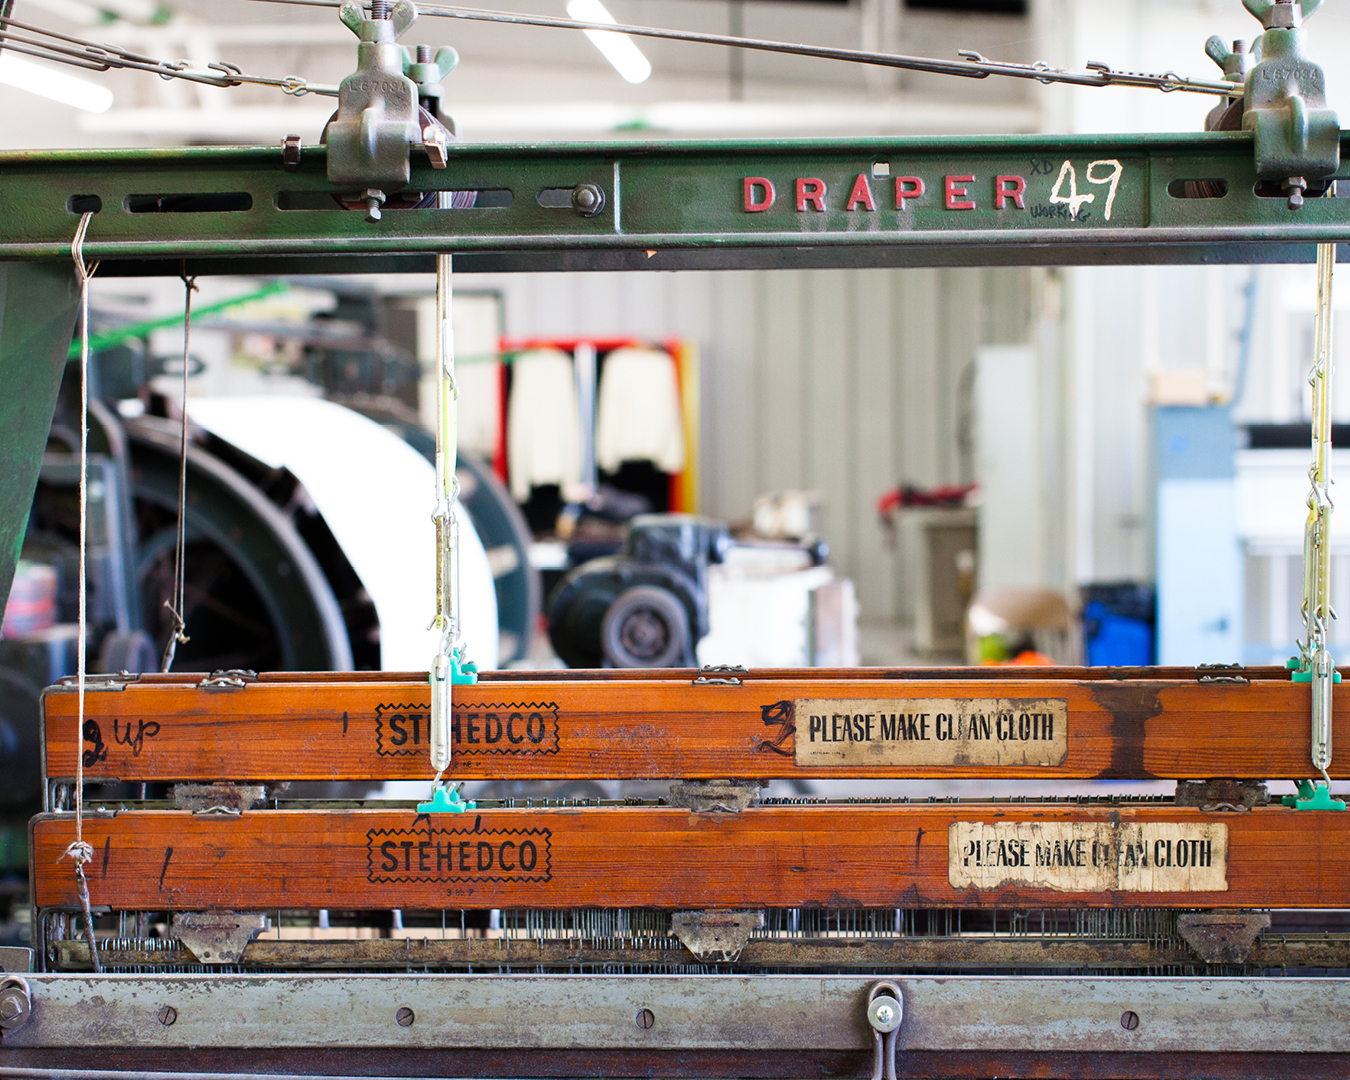 photograph-industrial-weaving-machinery-green-with-brown-stehedco-wood-stickers-please-make-clean-cloth